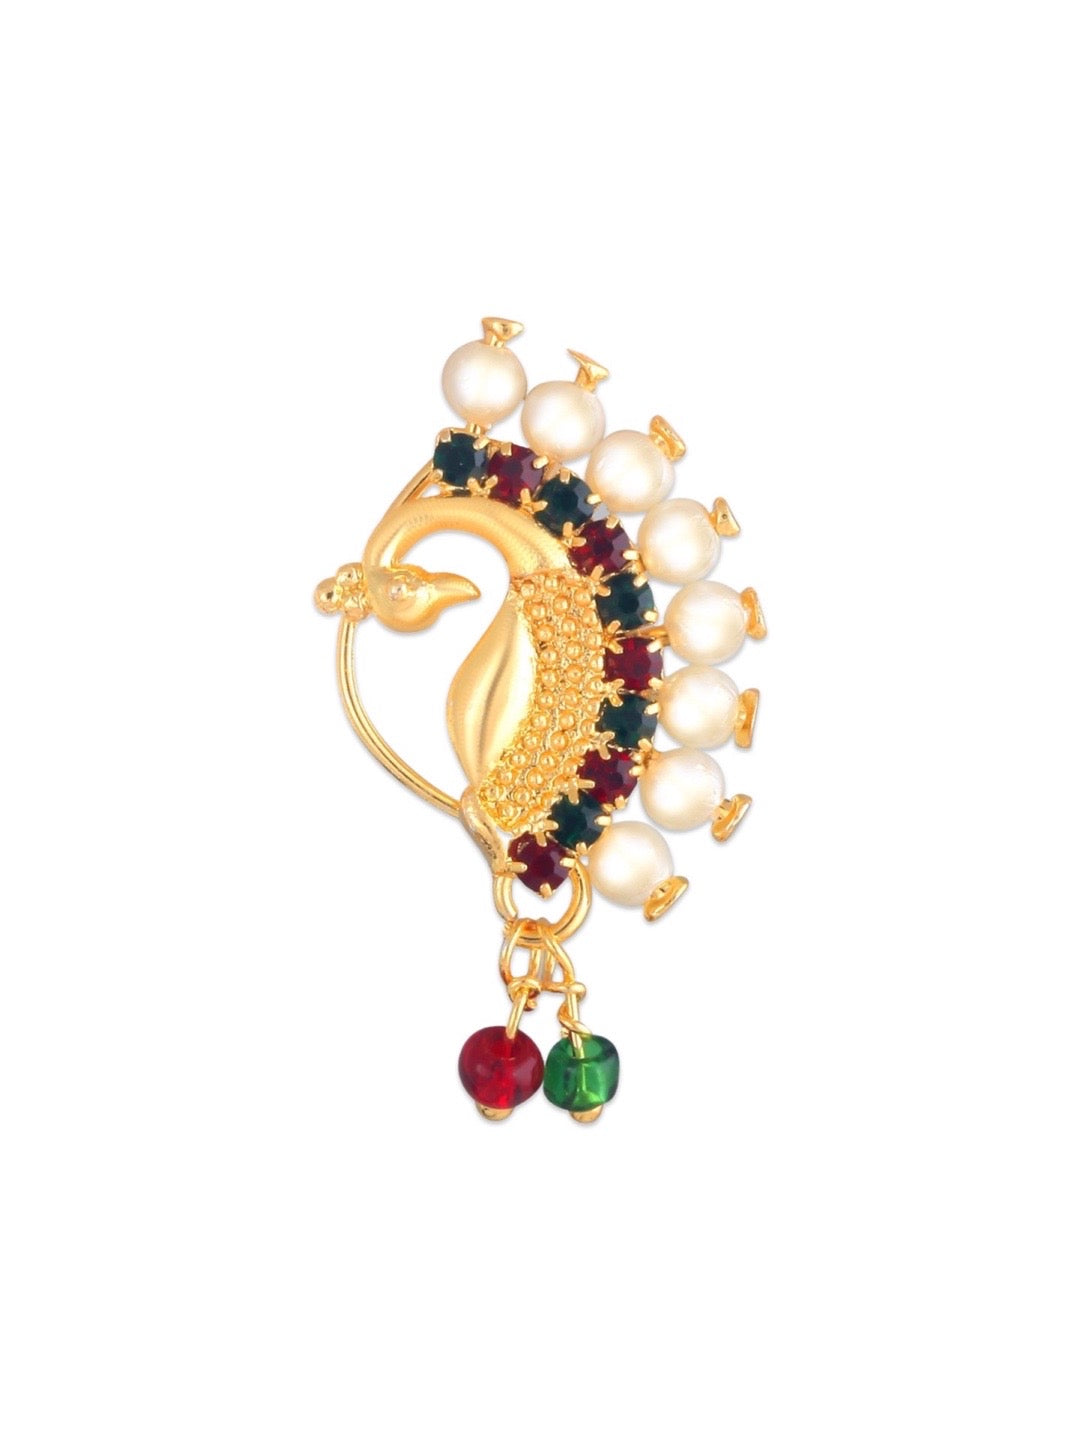 Maharashtrian Nath Gold Plated Peacock Design Nose Pin Red & Green Colour with Pearls